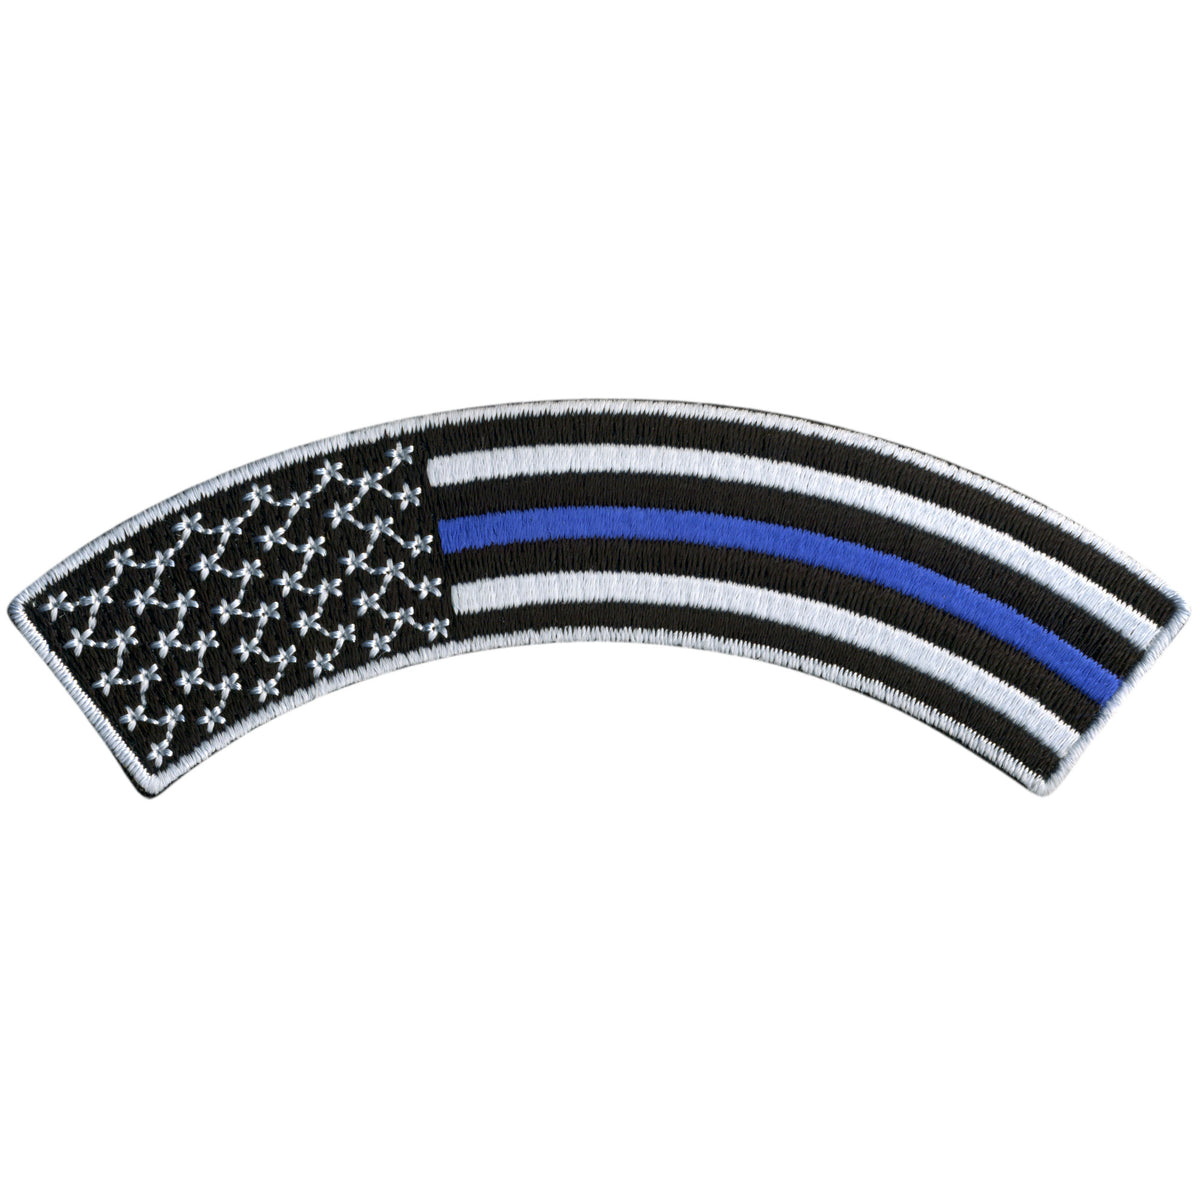 Hot Leathers Thin Blue Line 4” X 1” Top Rocker Patch